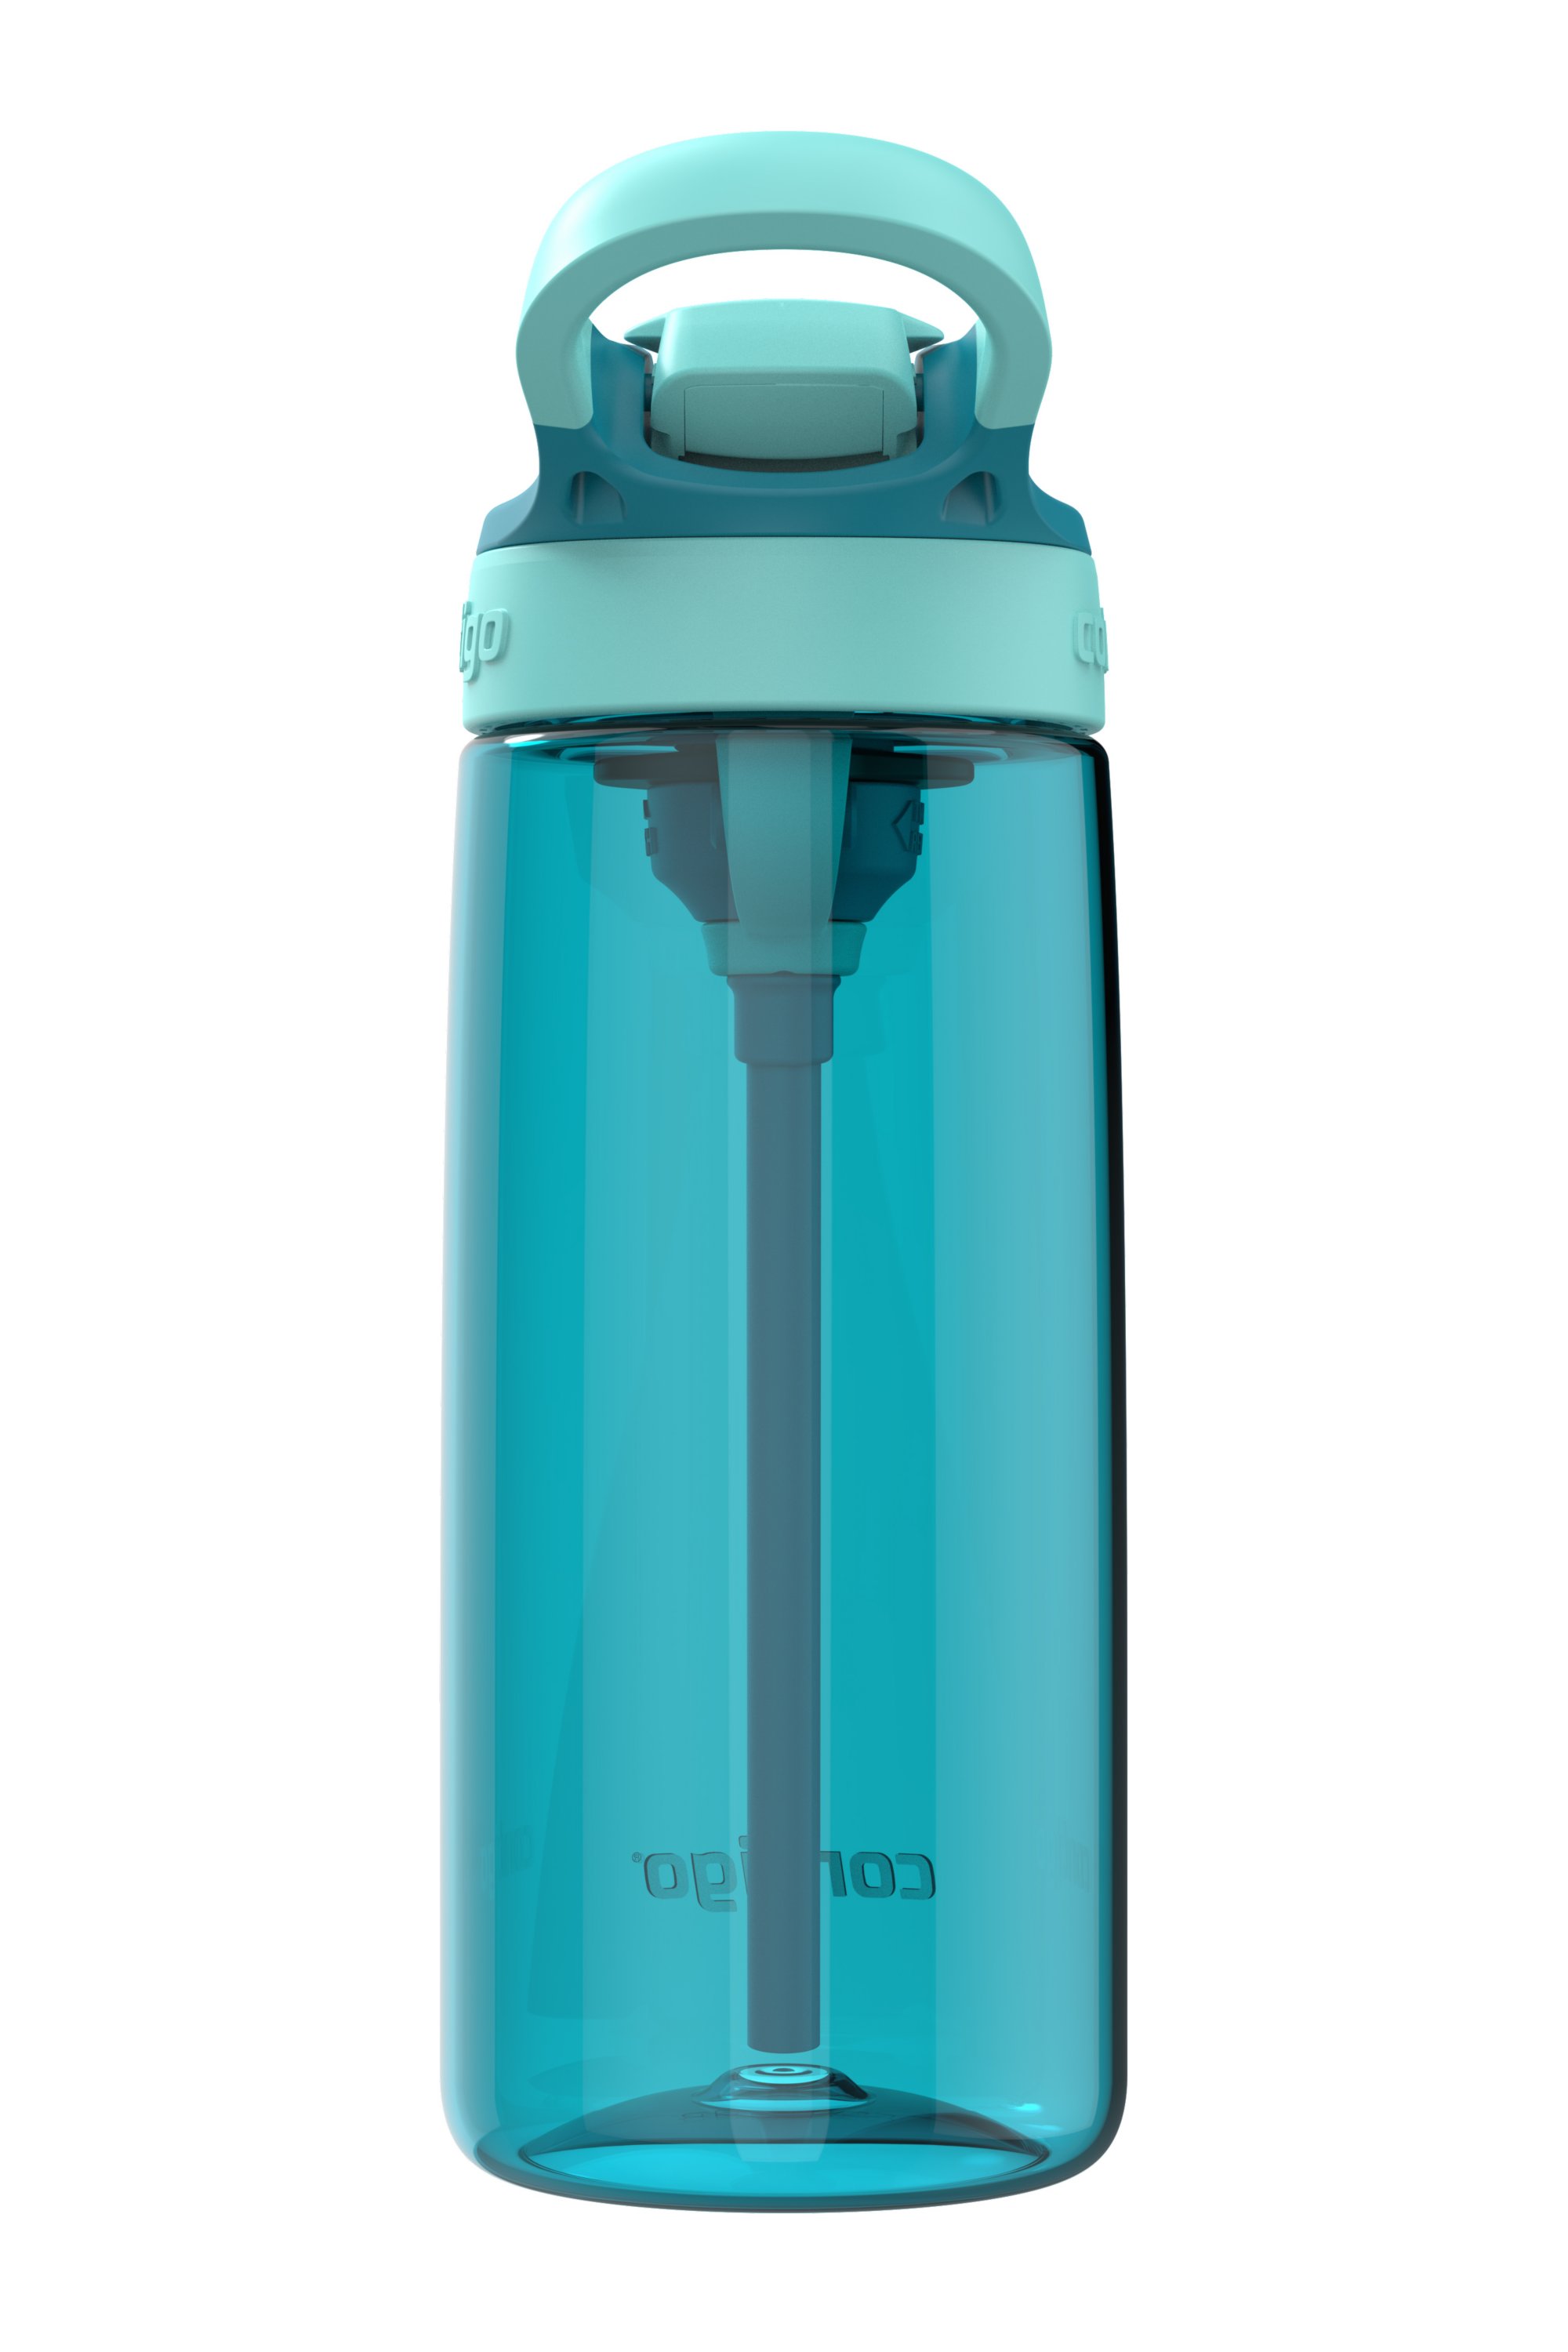 Contigo Aubrey Kids Cleanable Water Bottle with Silicone Straw and Spill- Proof L